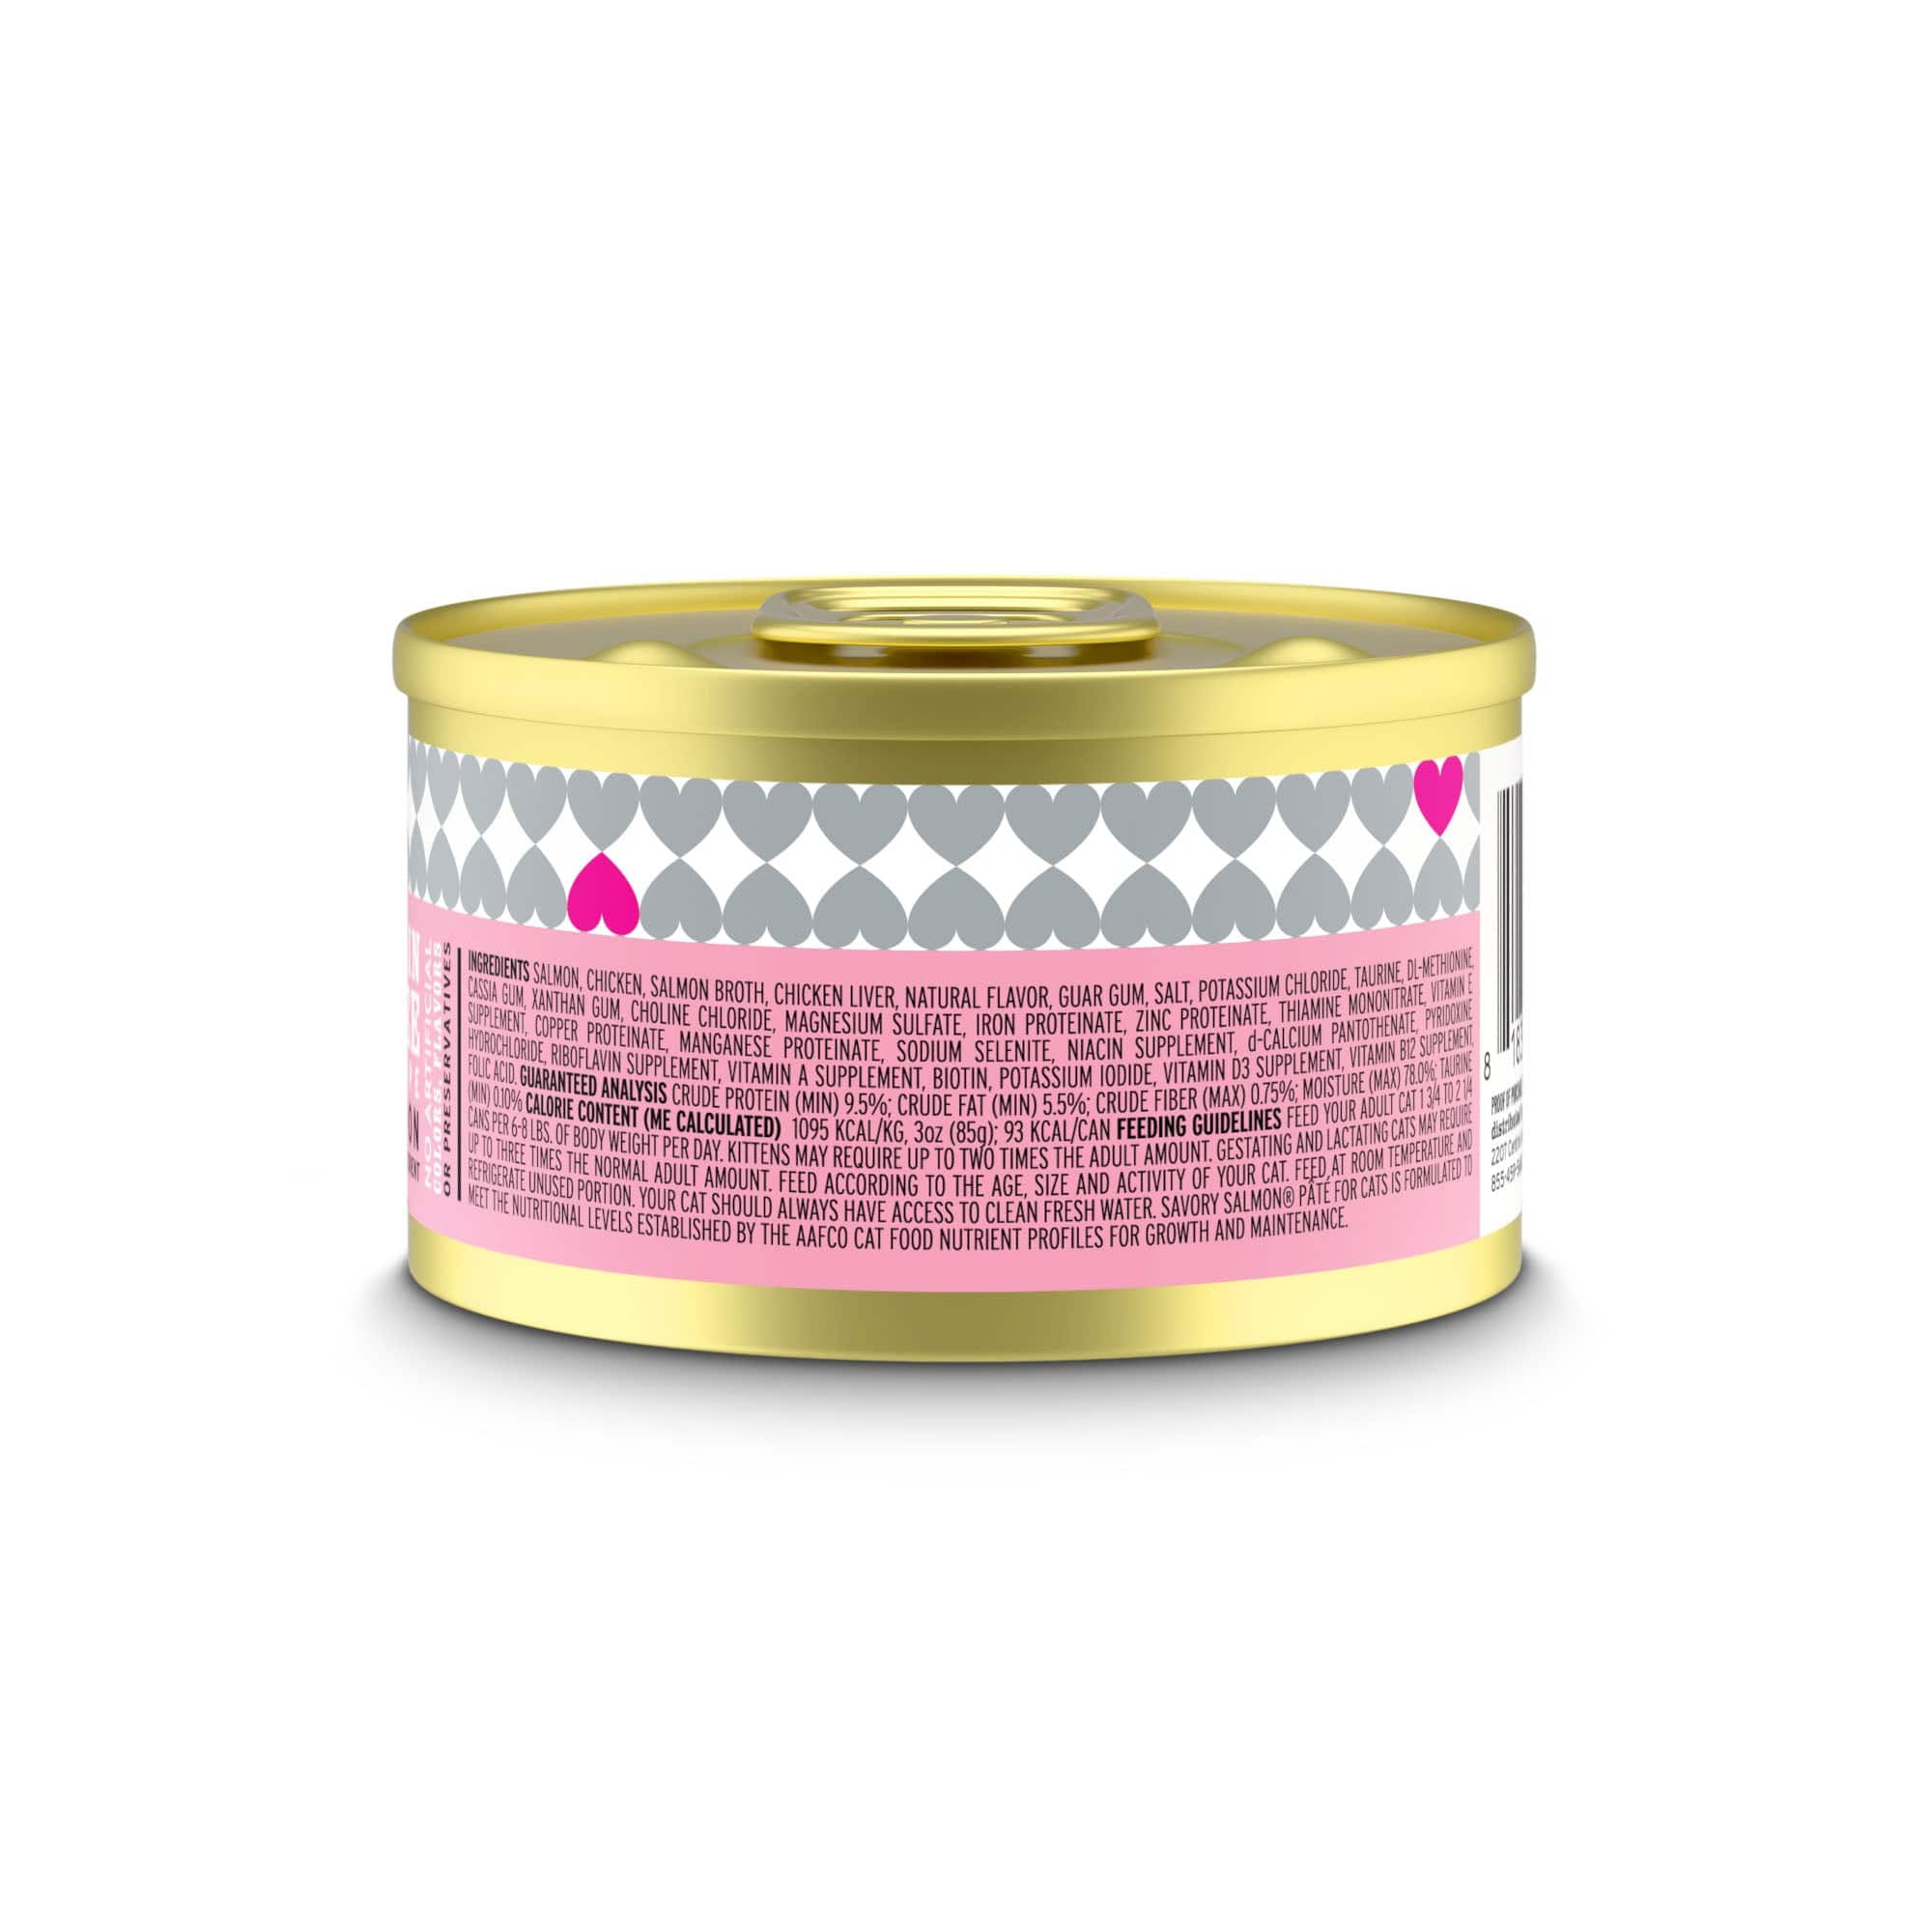 A close-up of a can of savory salmon pâté cat food with a gold lid.